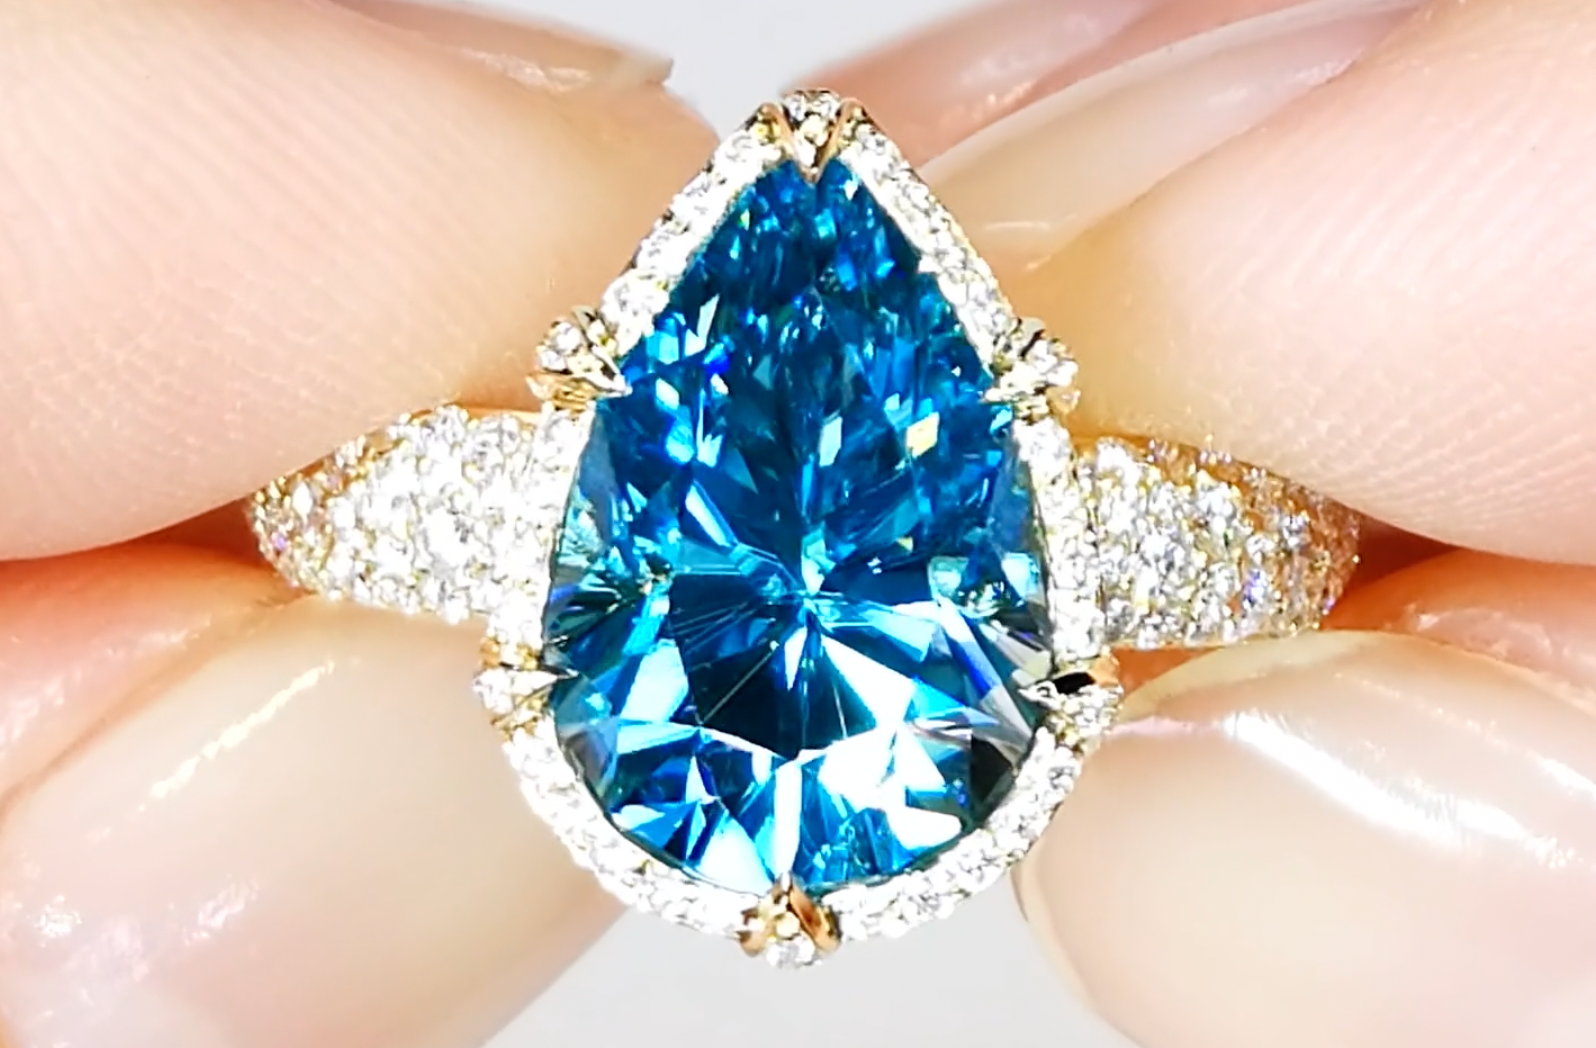 6.94ct Blue Zircon Ring with D Flawless Diamonds set in 18K Yellow Gold